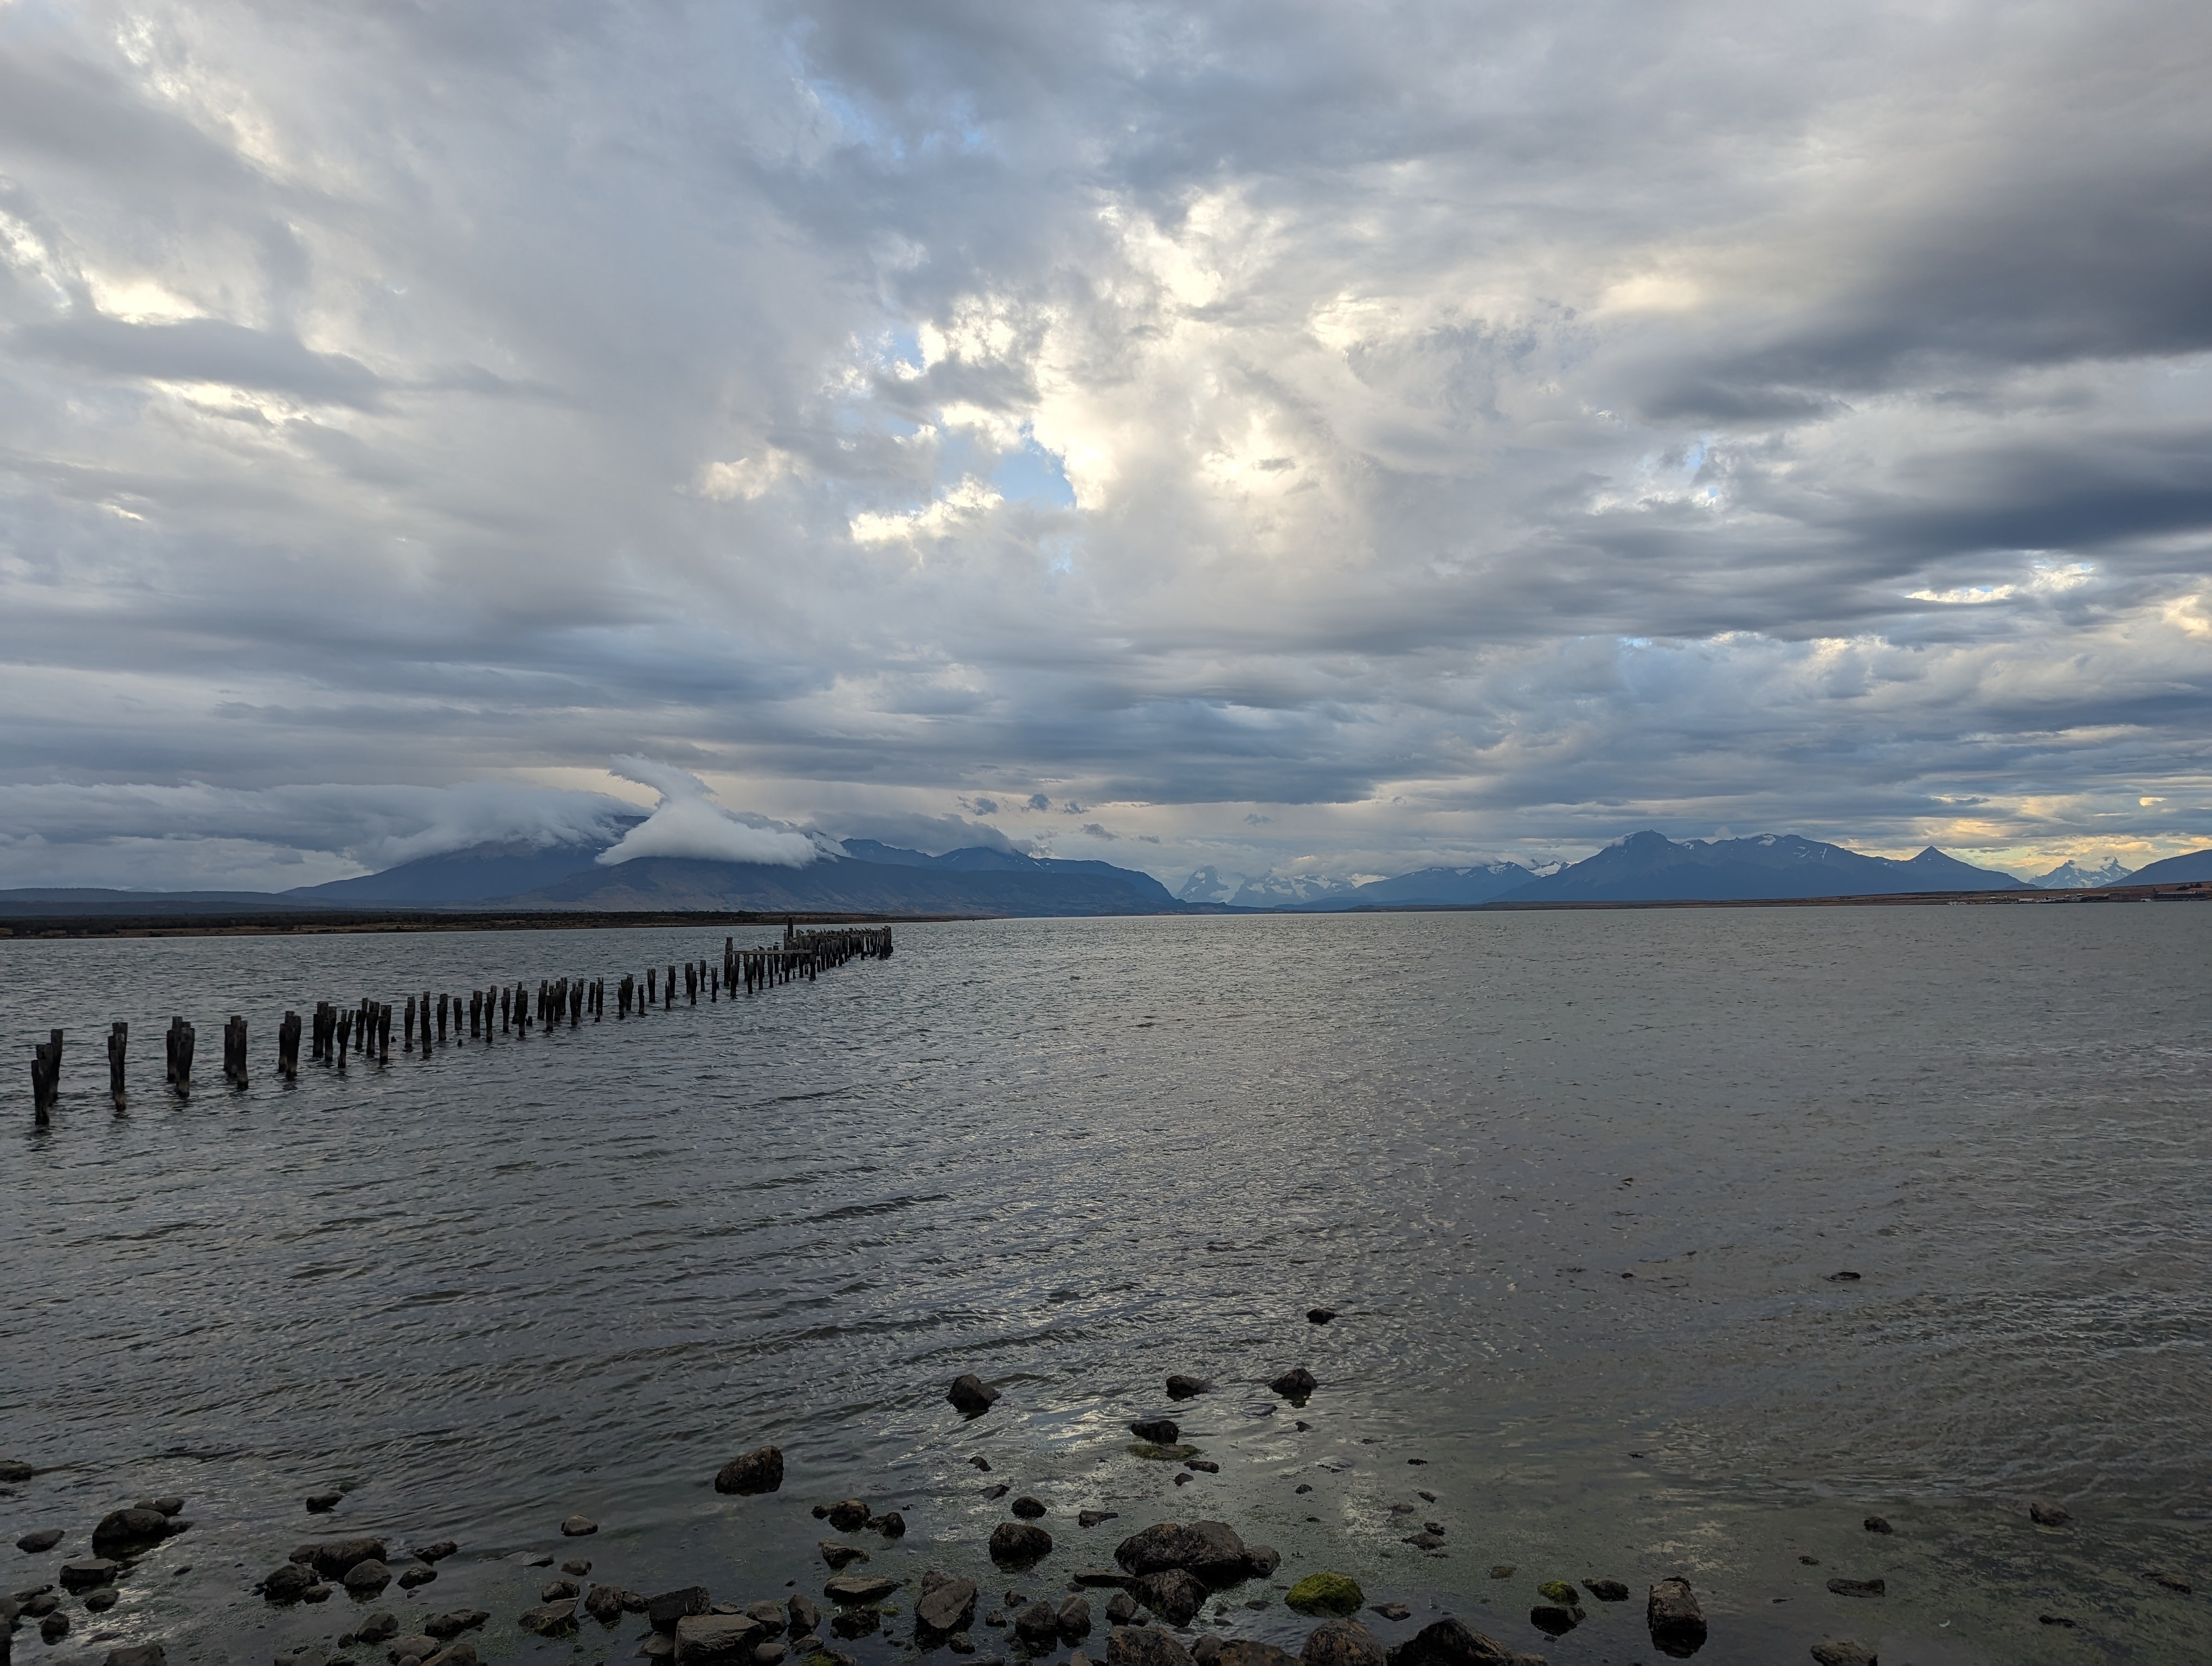 Mountains from water's edge at Puerto Natales